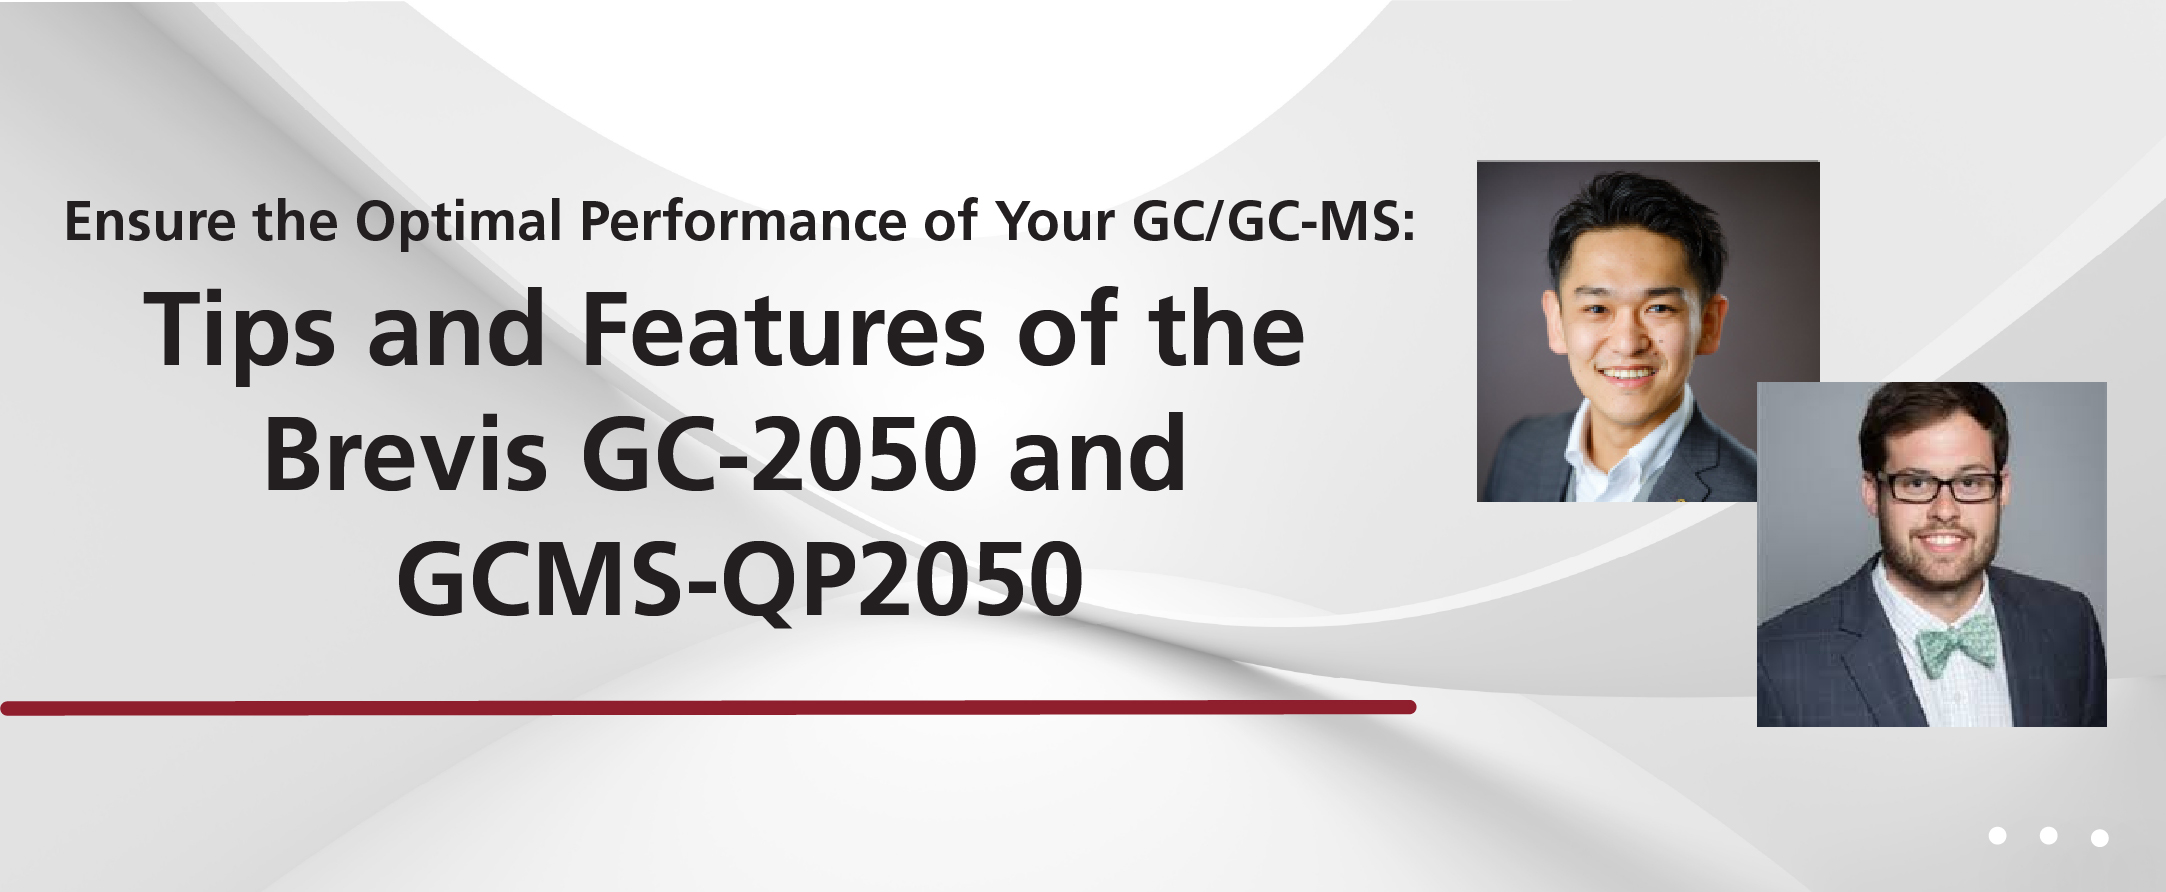 Ensure the Optimal Performance of Your GC/GC-MS: Tips and Features of the Brevis GC-2050 and GCMS-QP2050